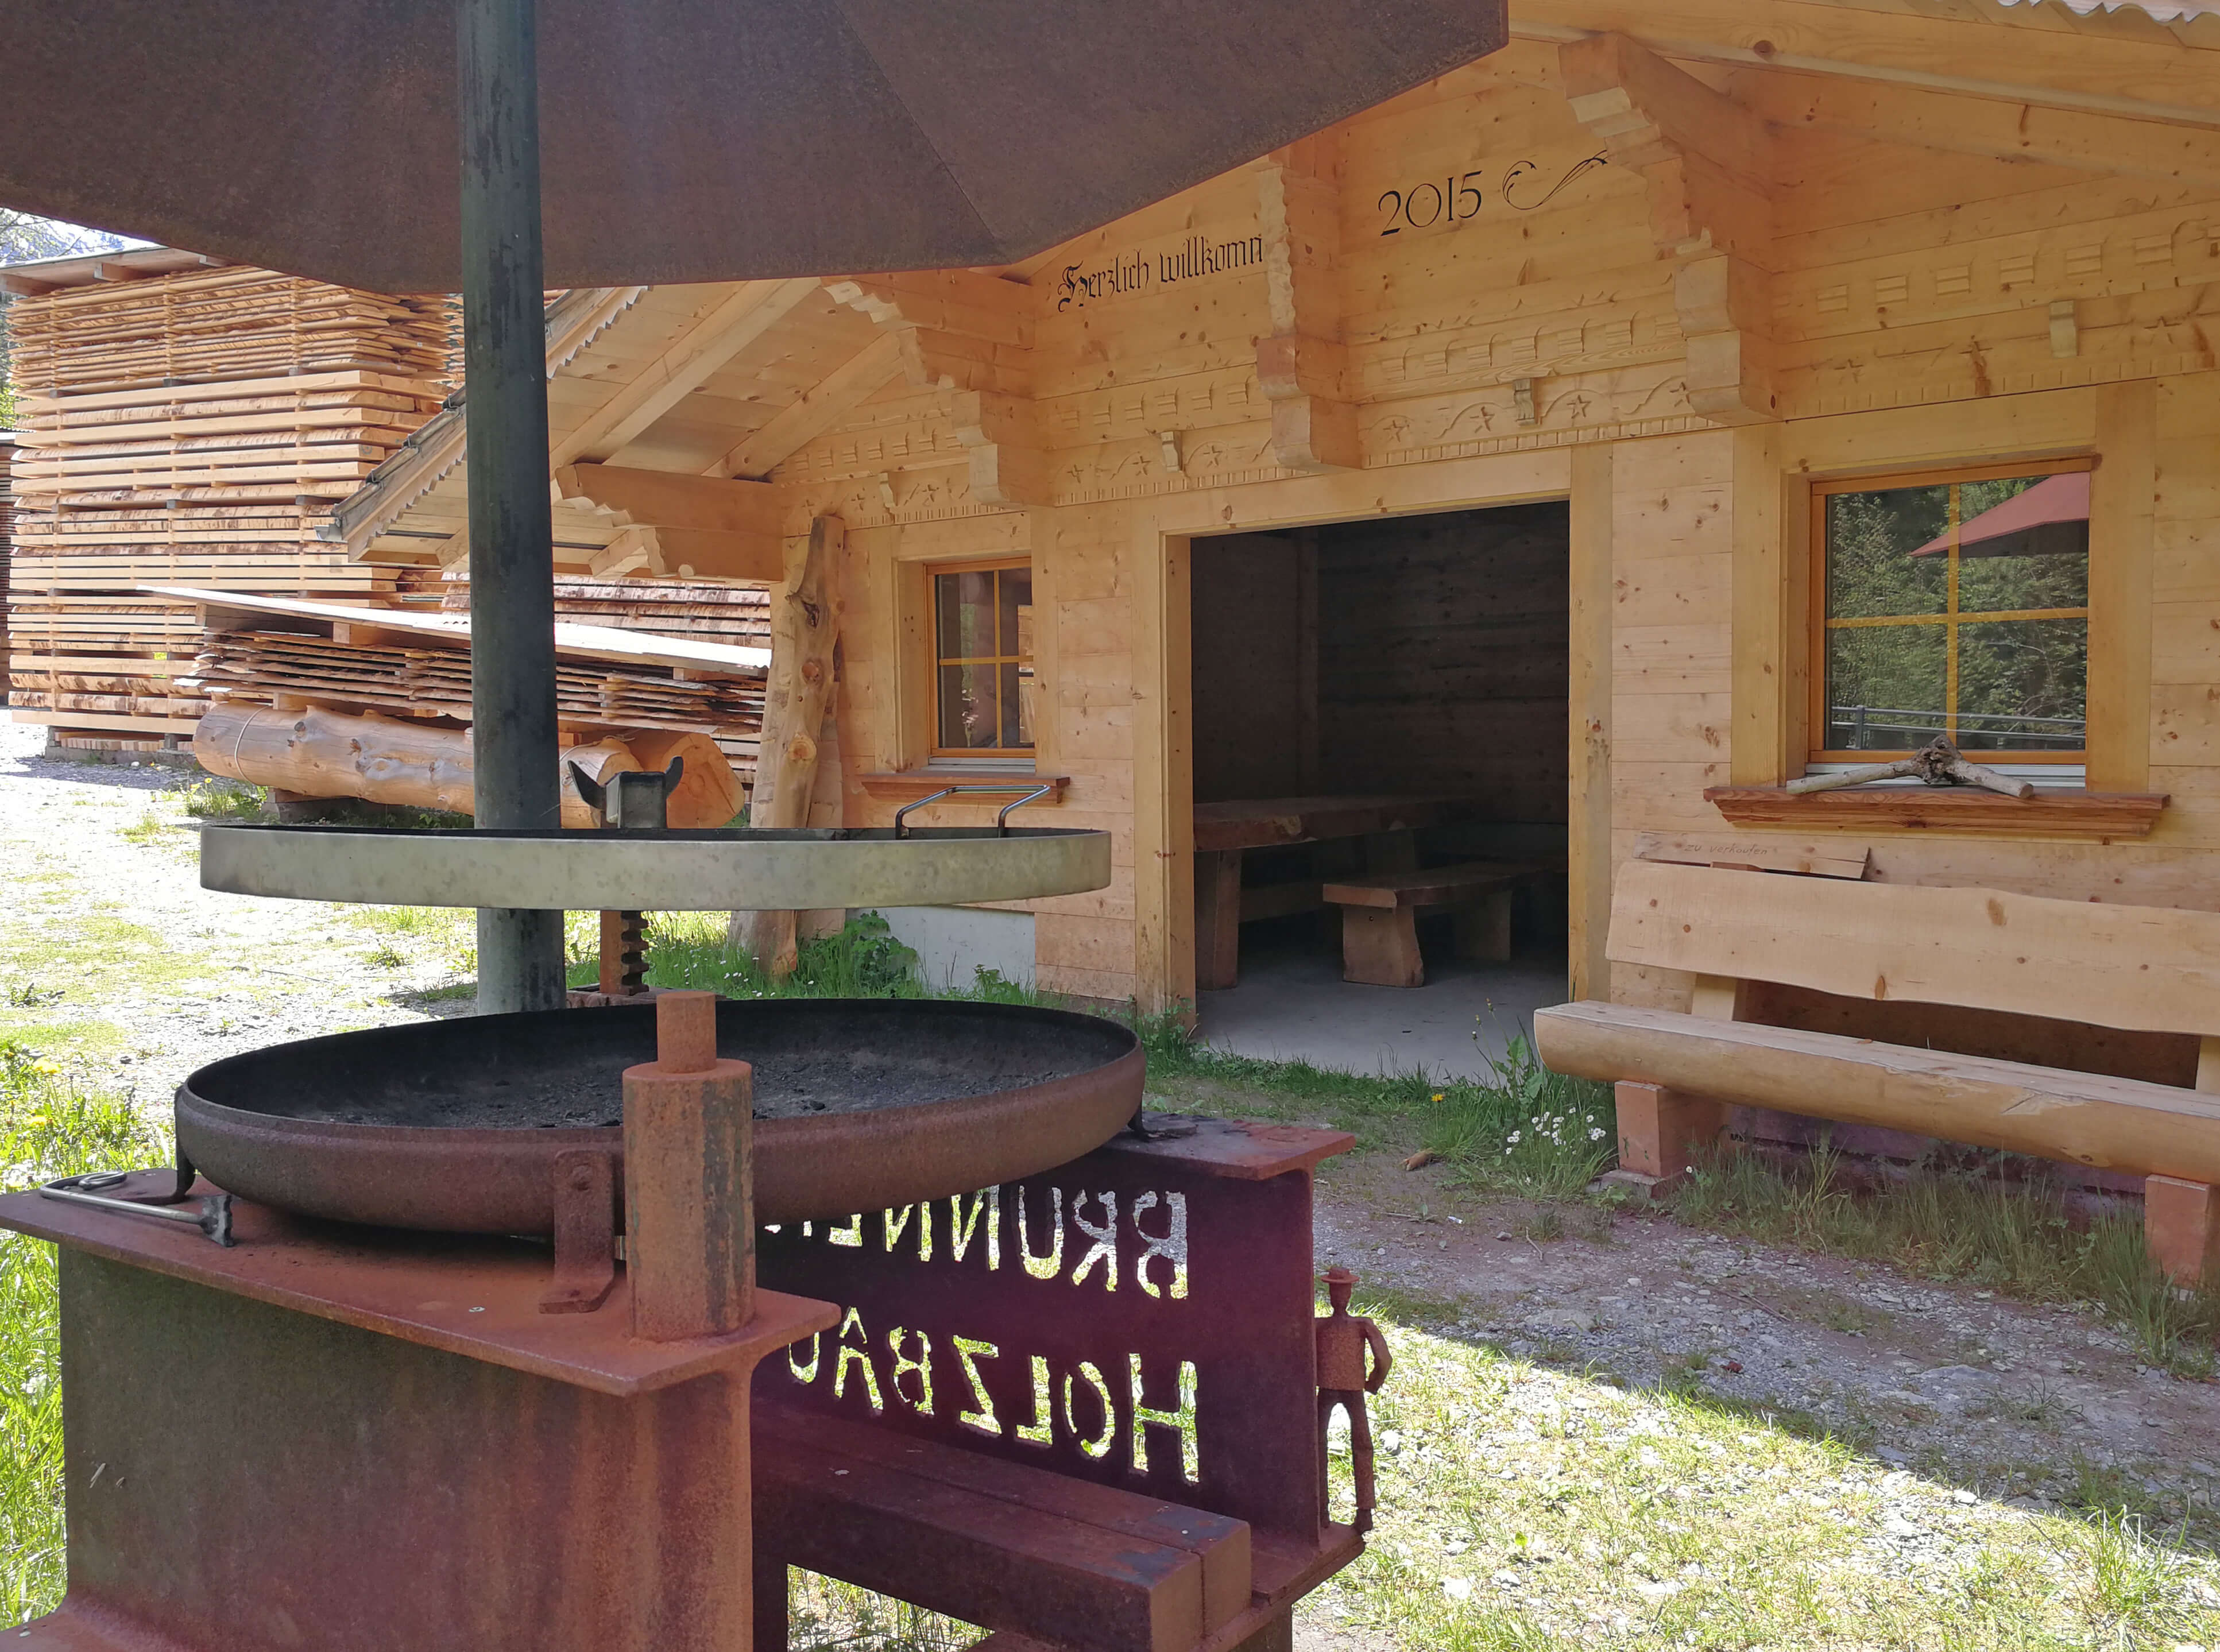 Barbecue area with entrance to the hut